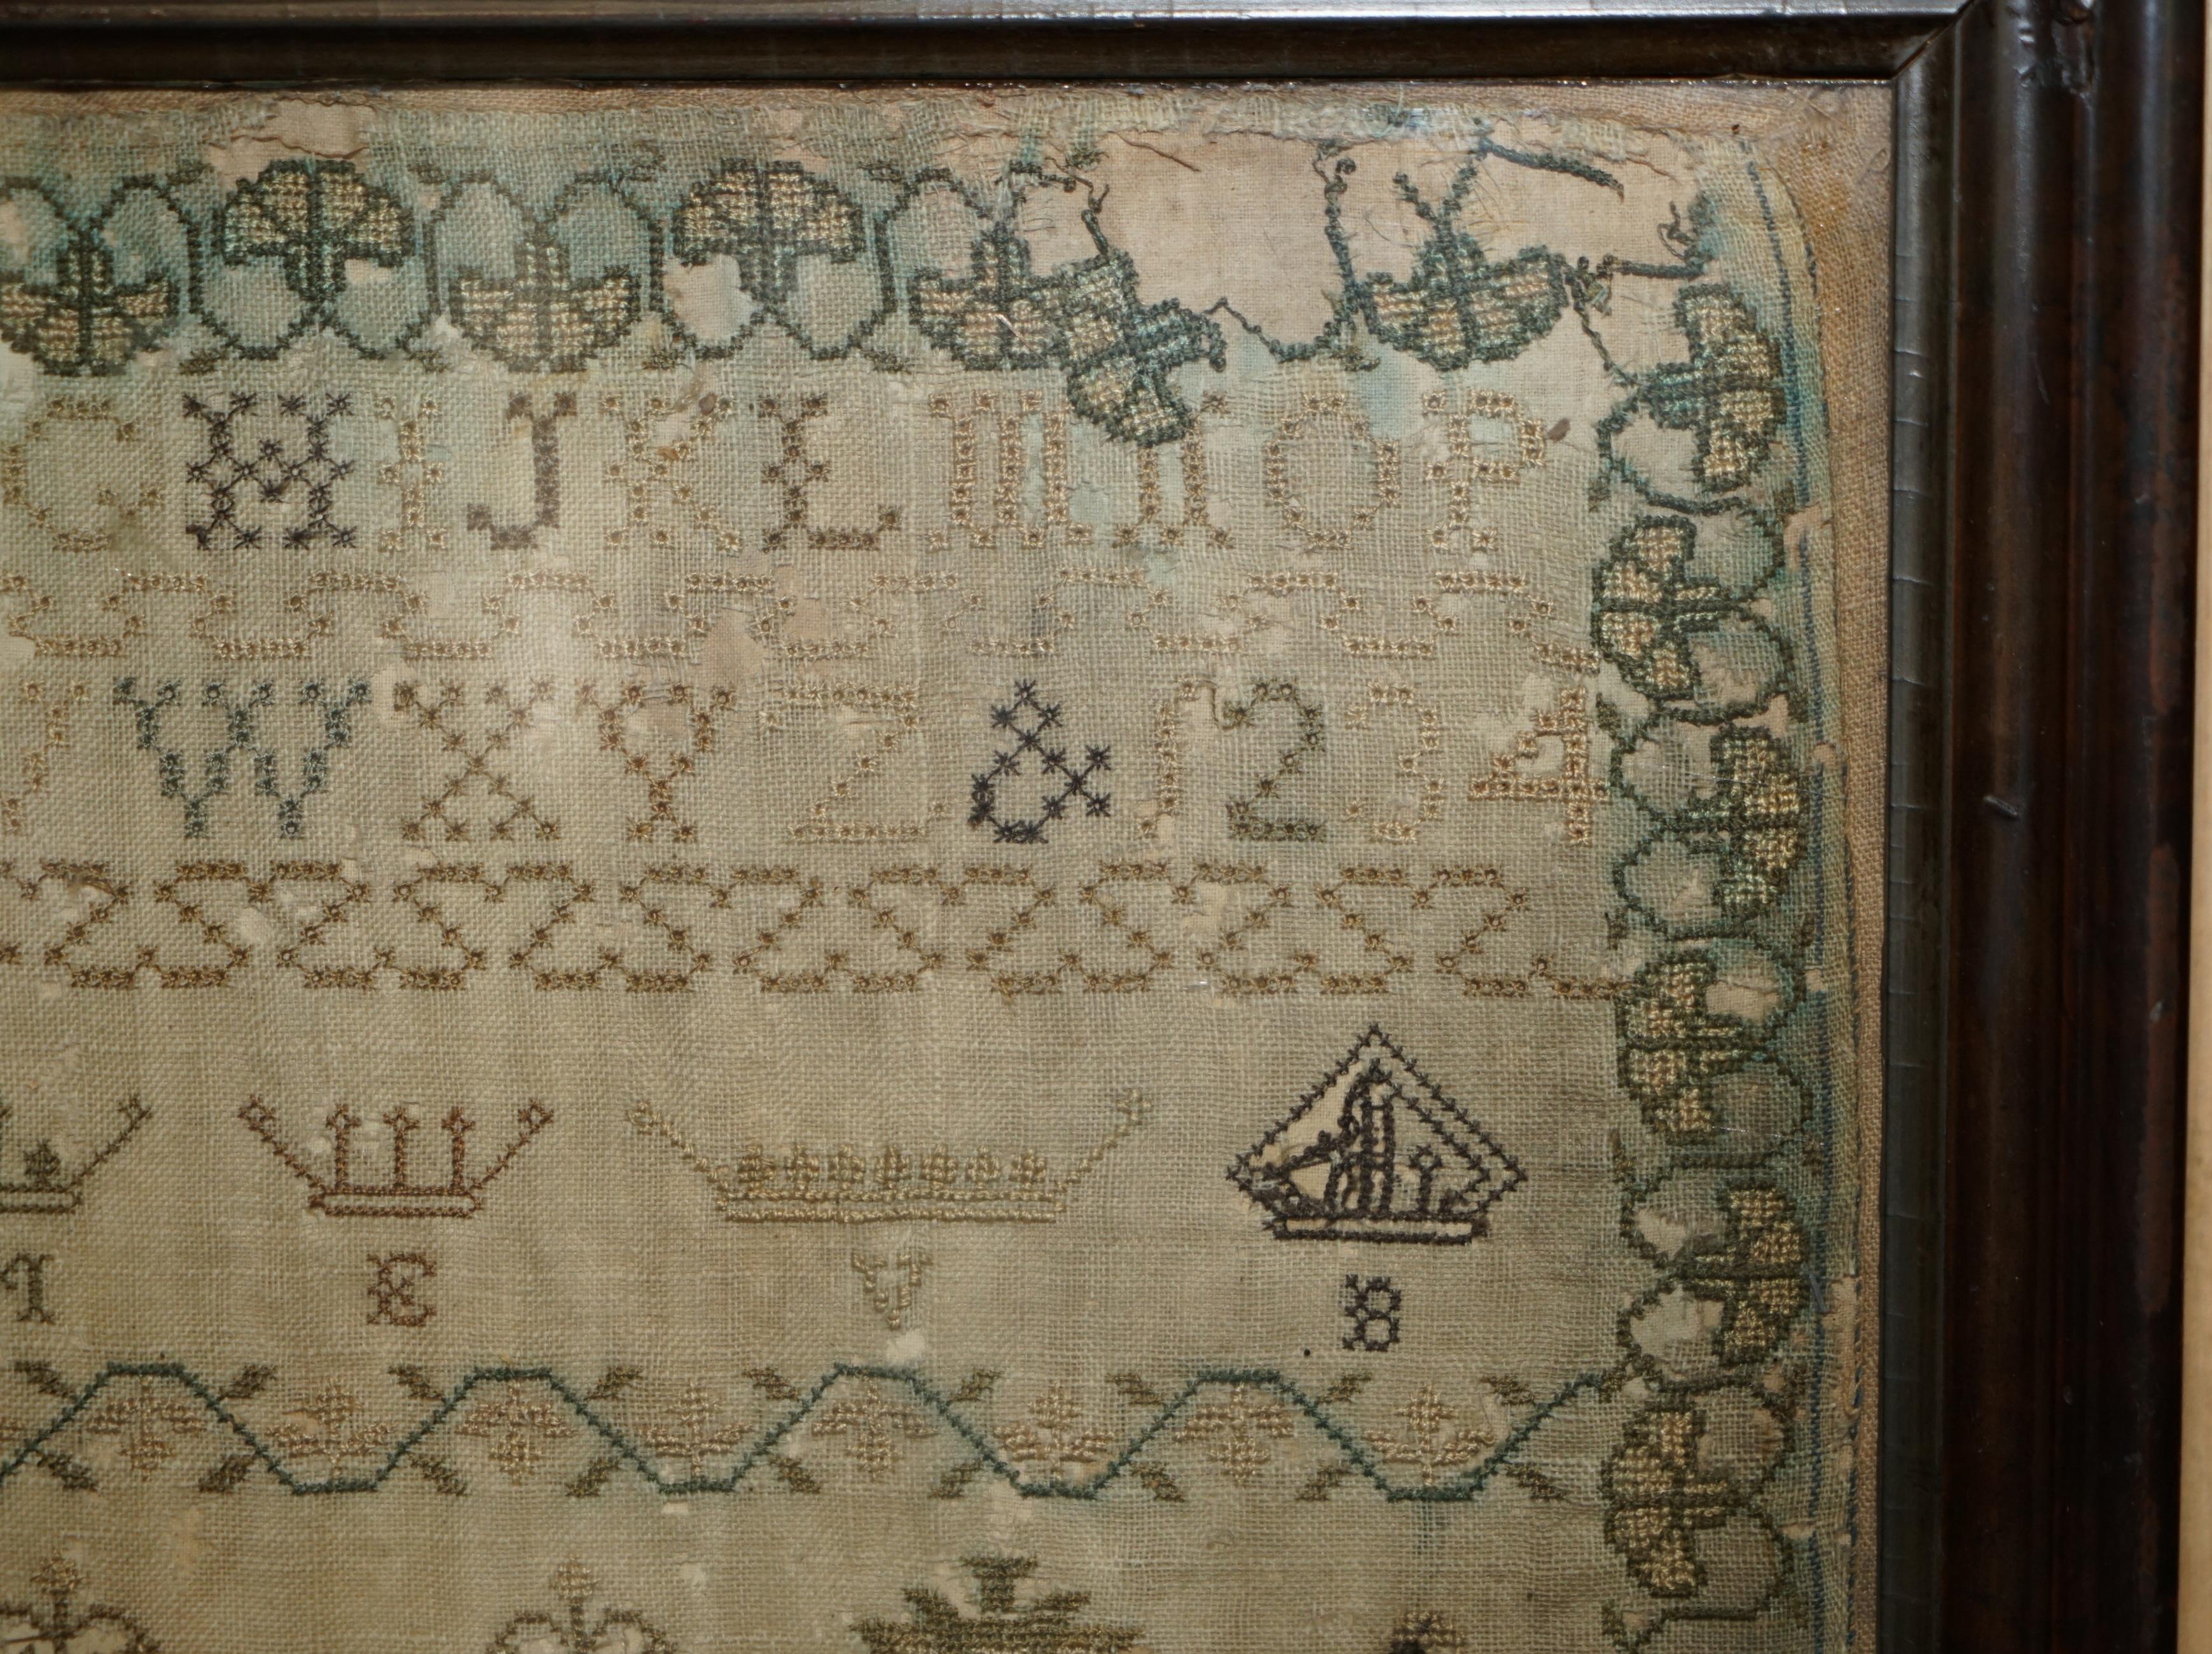 Cotton ANTIQUE 1838 ORIGINAL EARLY ViCTORIAN NEEDLEWORK SAMPLER IN THE PERIOD FRAME For Sale